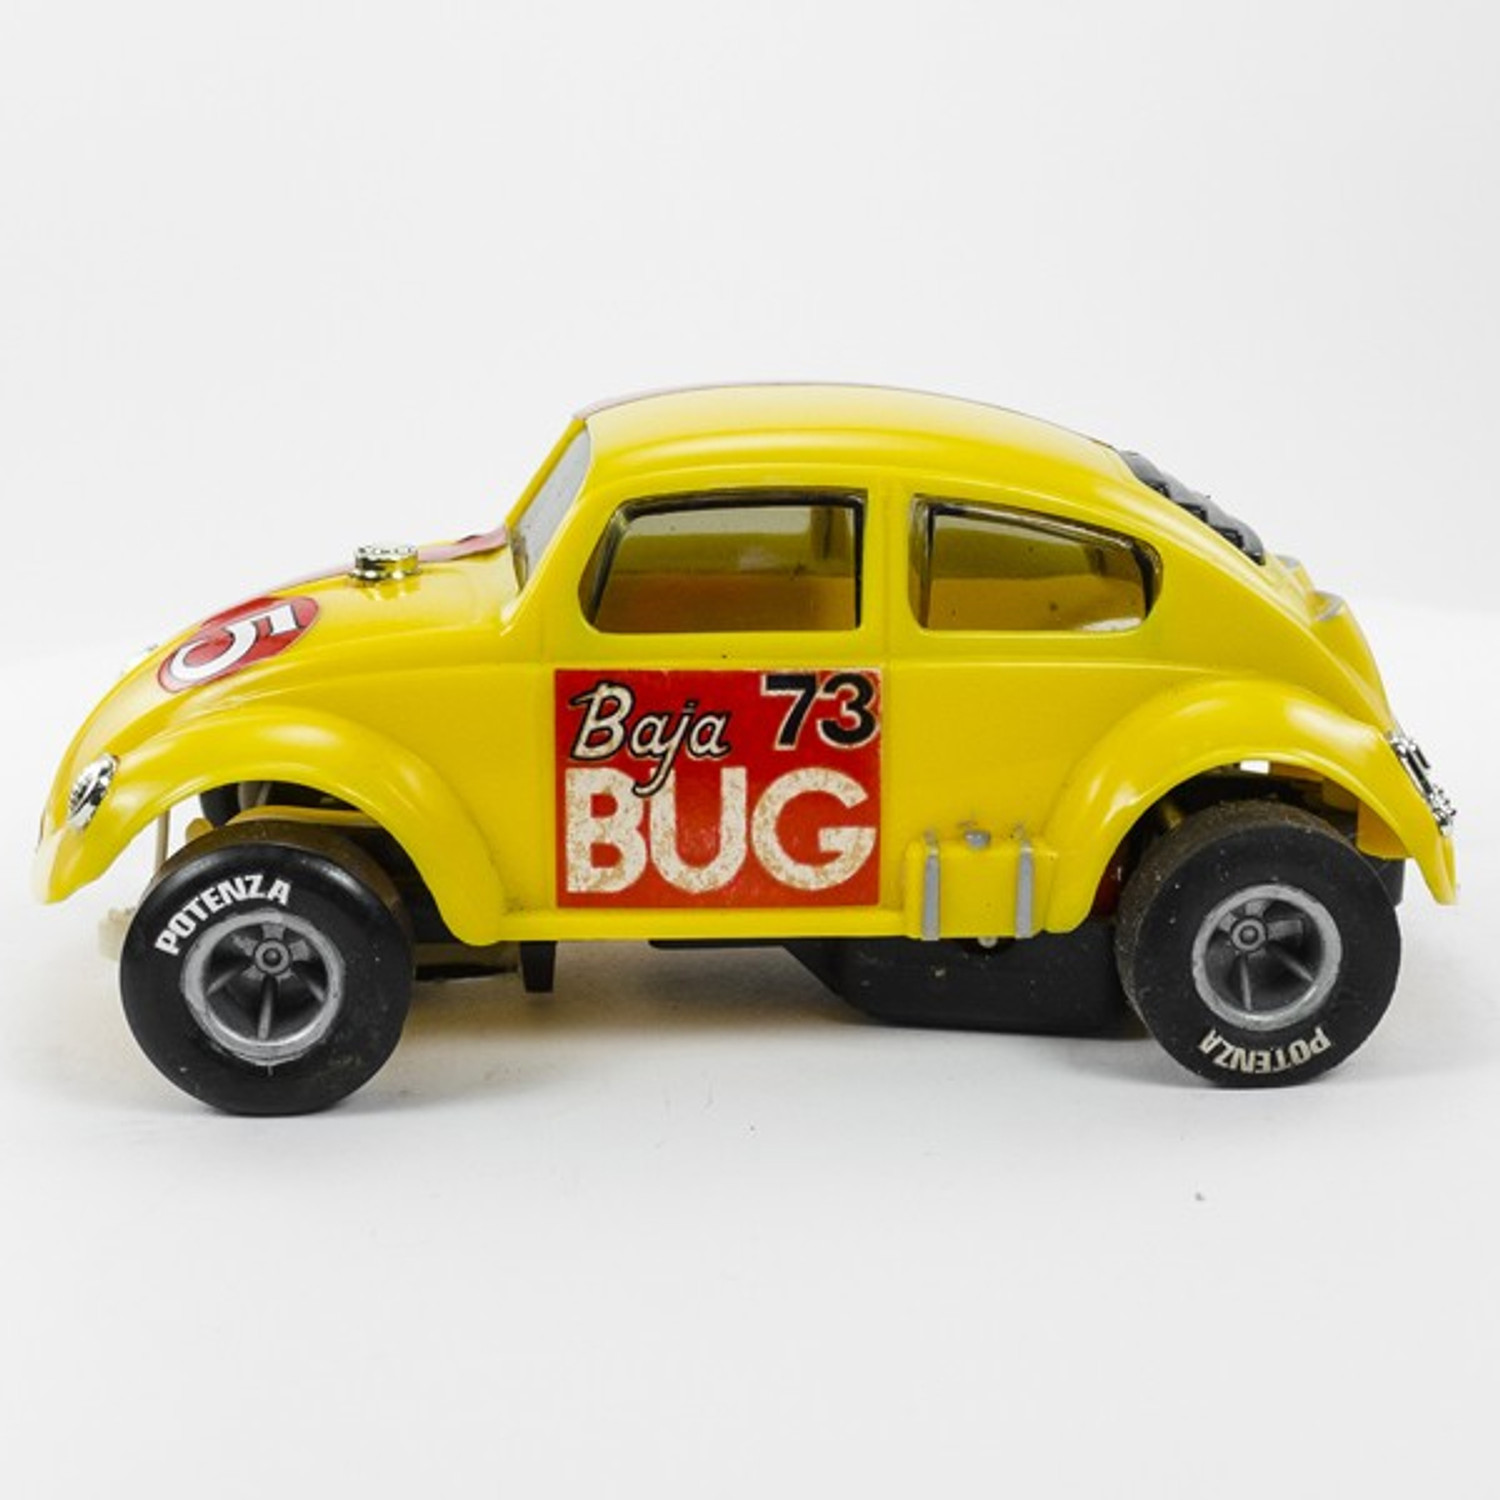 Stock Number: 16187 - Yellow Bug by Unknown